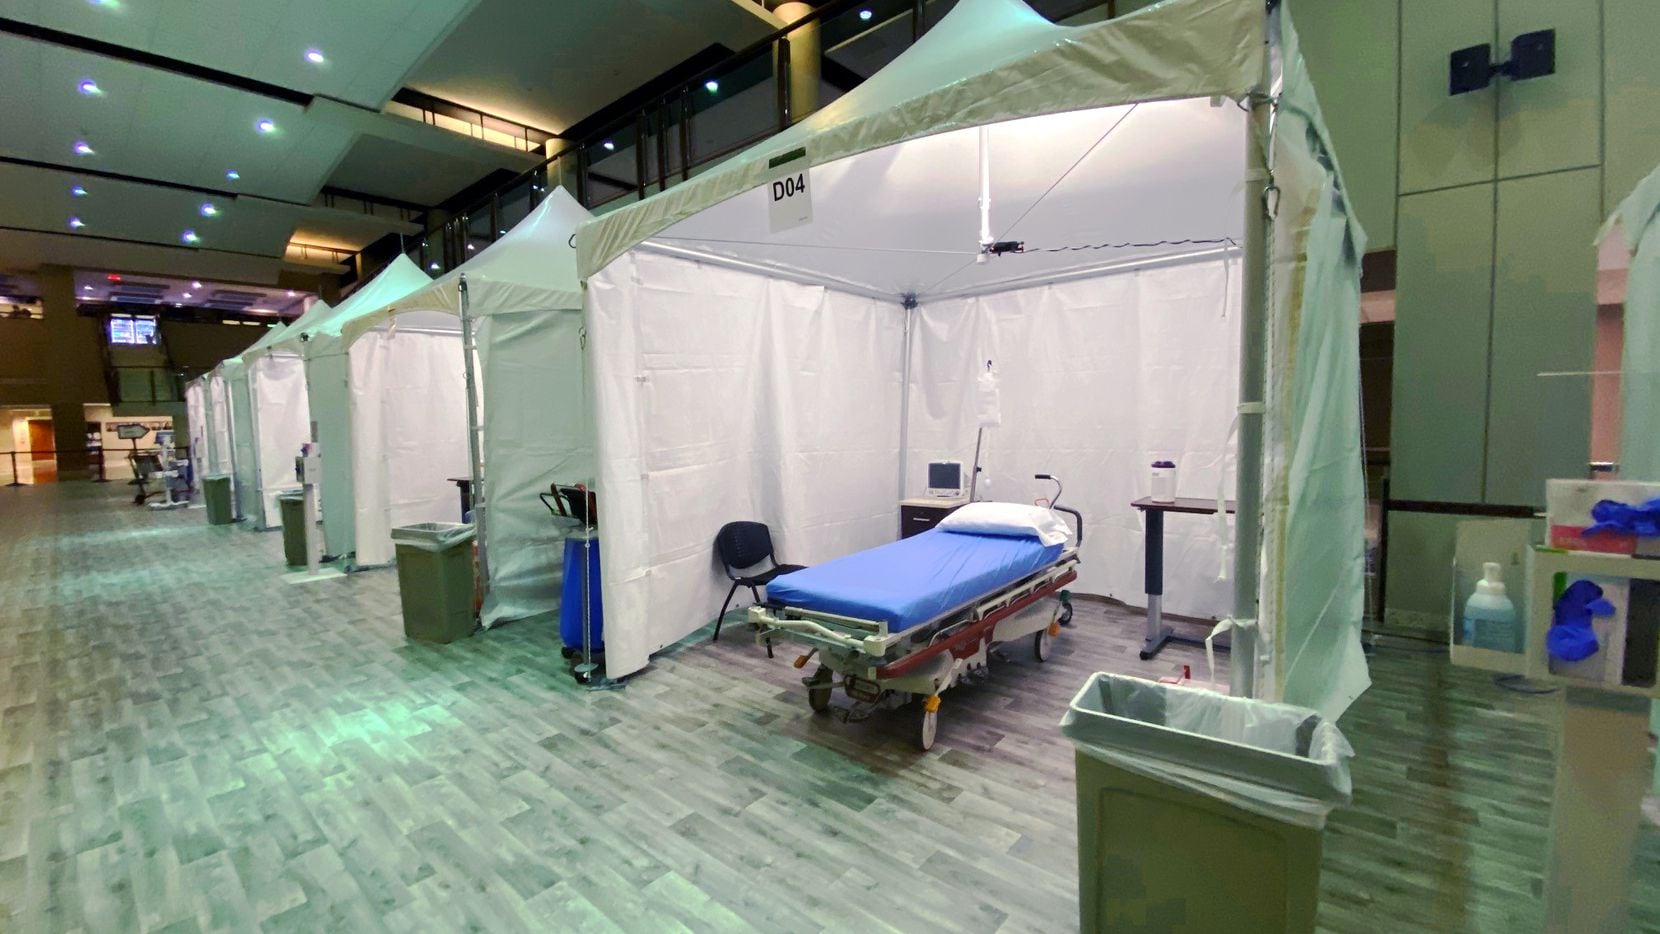 Texas Health Plano has set up emergency tents in its lobby to help treat patients amid an...